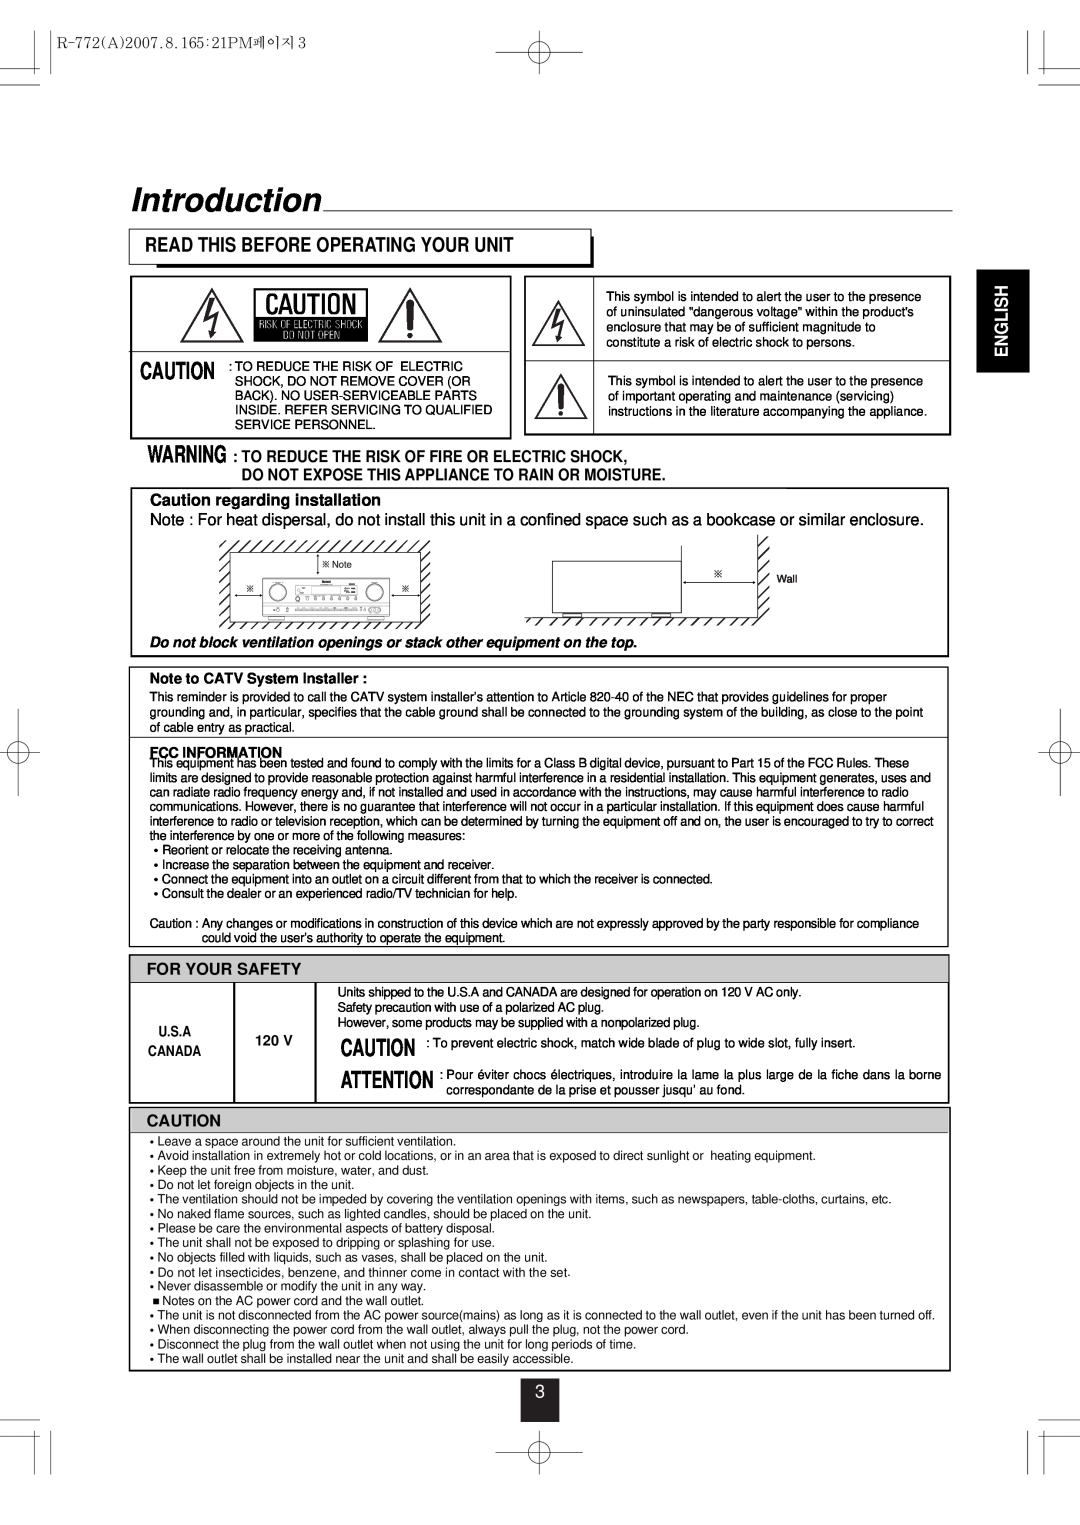 Sherwood R-772 manual Introduction, Read This Before Operating Your Unit, Do Not Expose This Appliance To Rain Or Moisture 